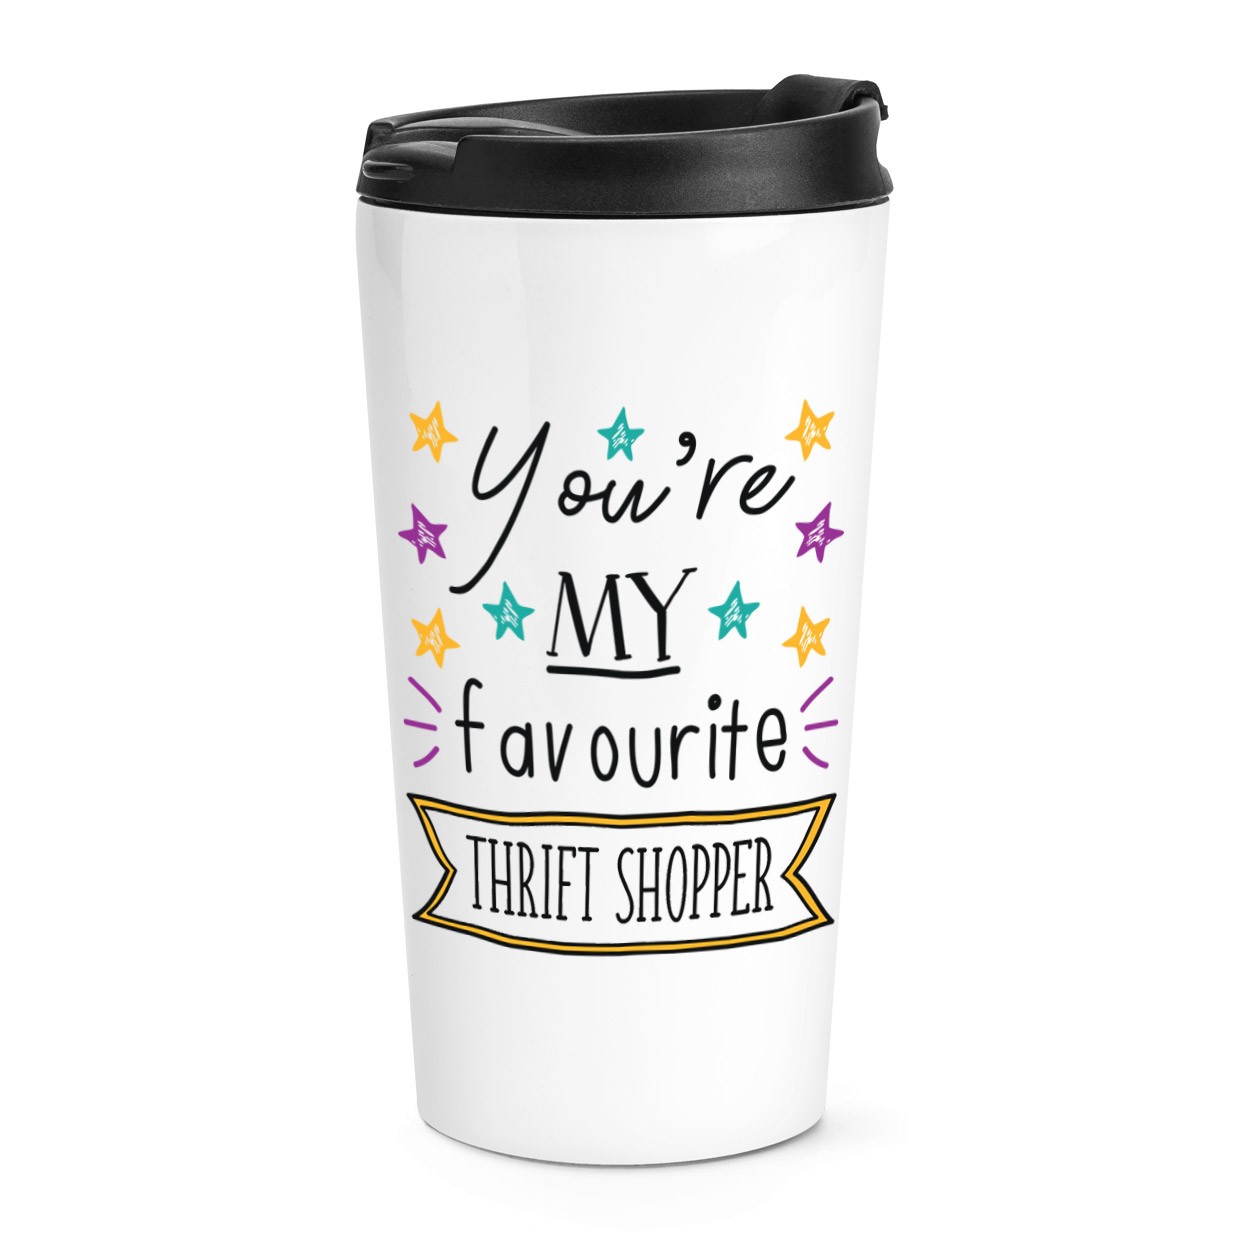 You're My Favourite Thrift Shopper Stars Travel Mug Cup